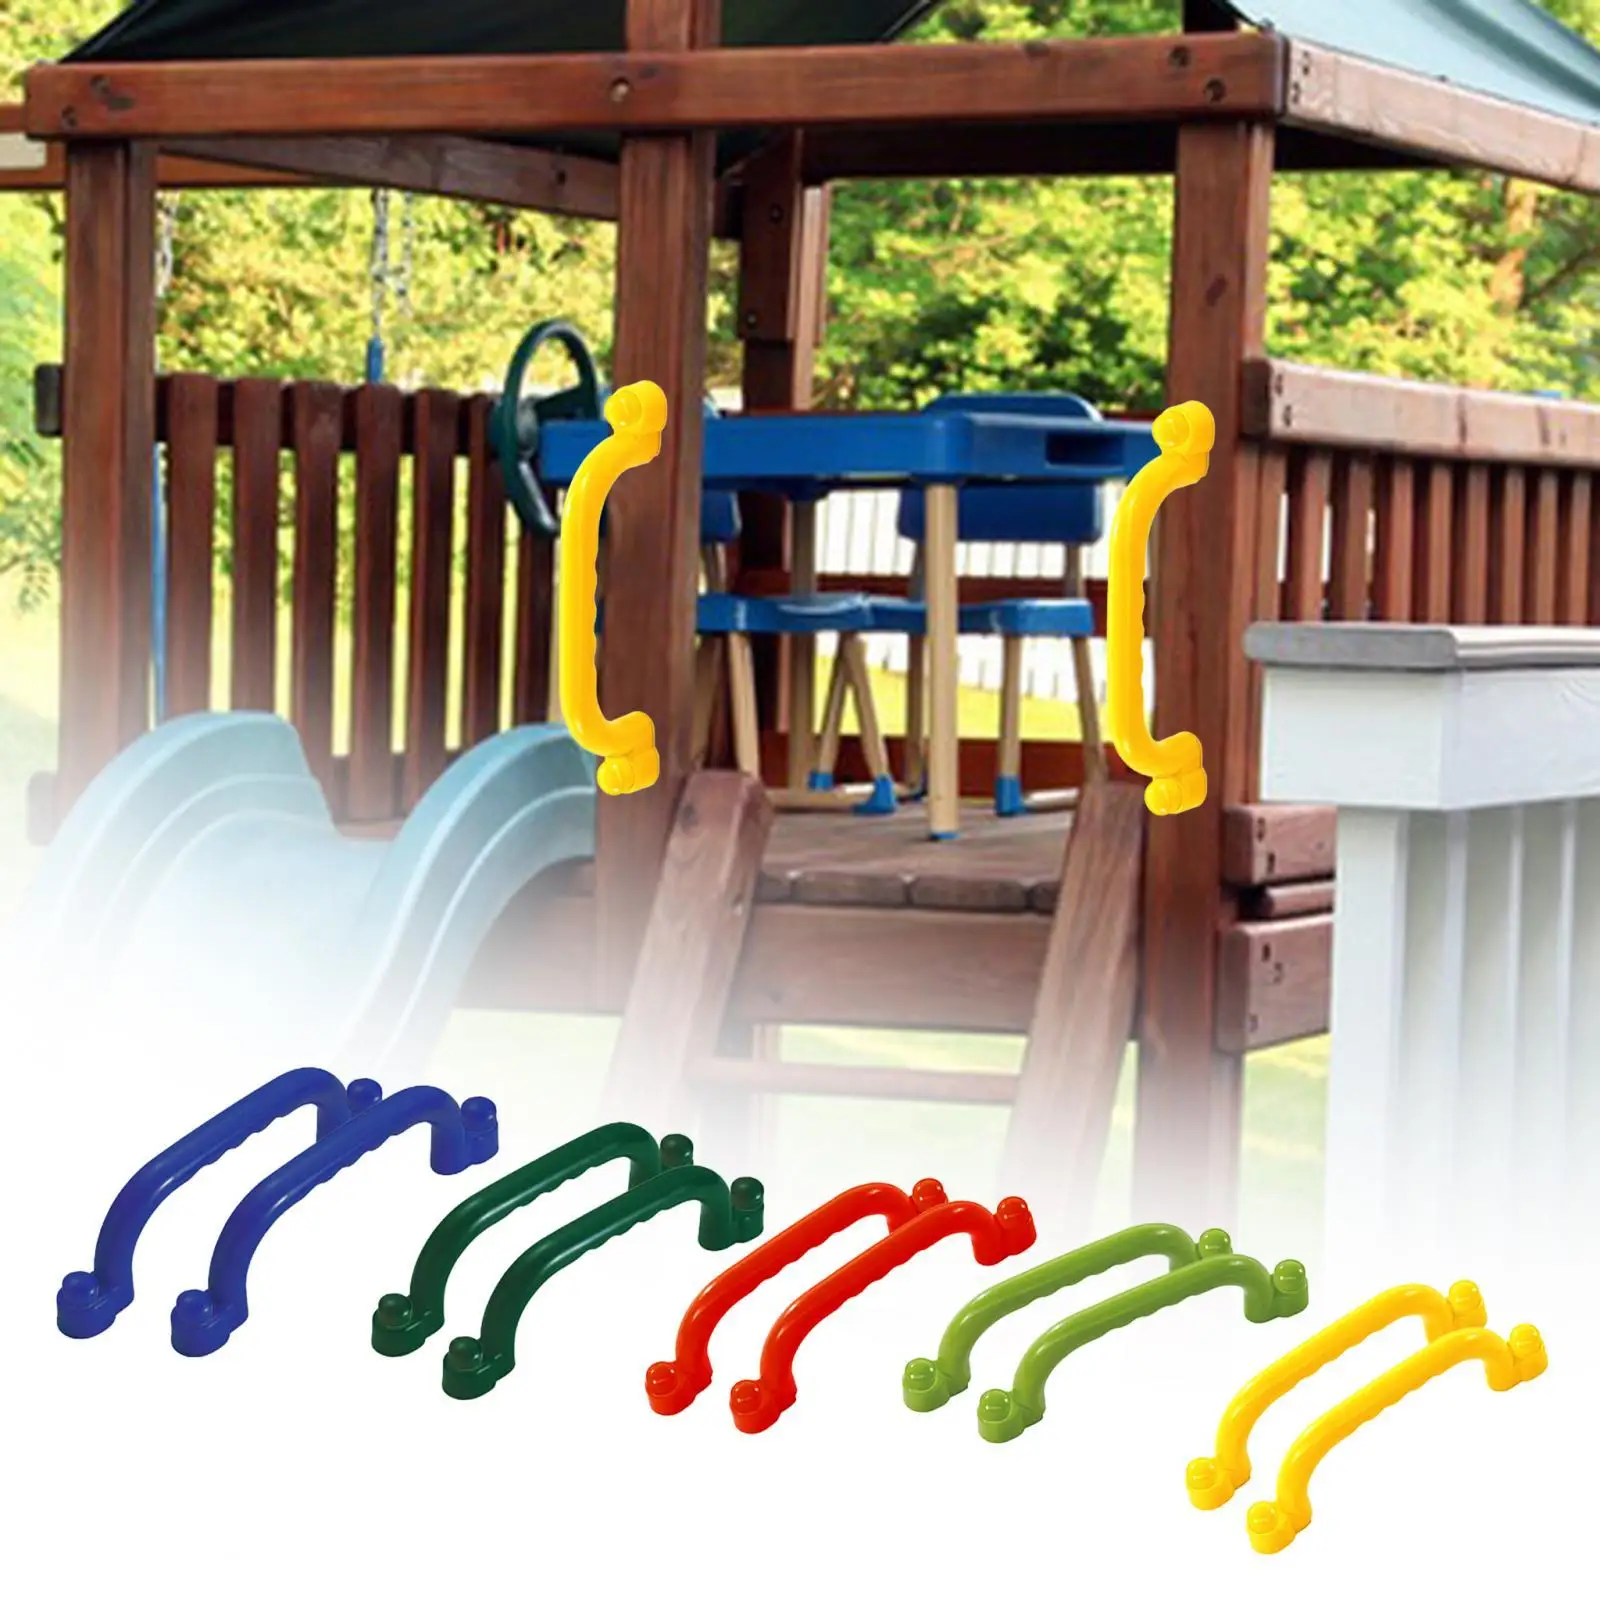 2x Playground Accessories Swingset Attachments Climb Playground Safety Handle for Park Treehouse Swingset Playhouse